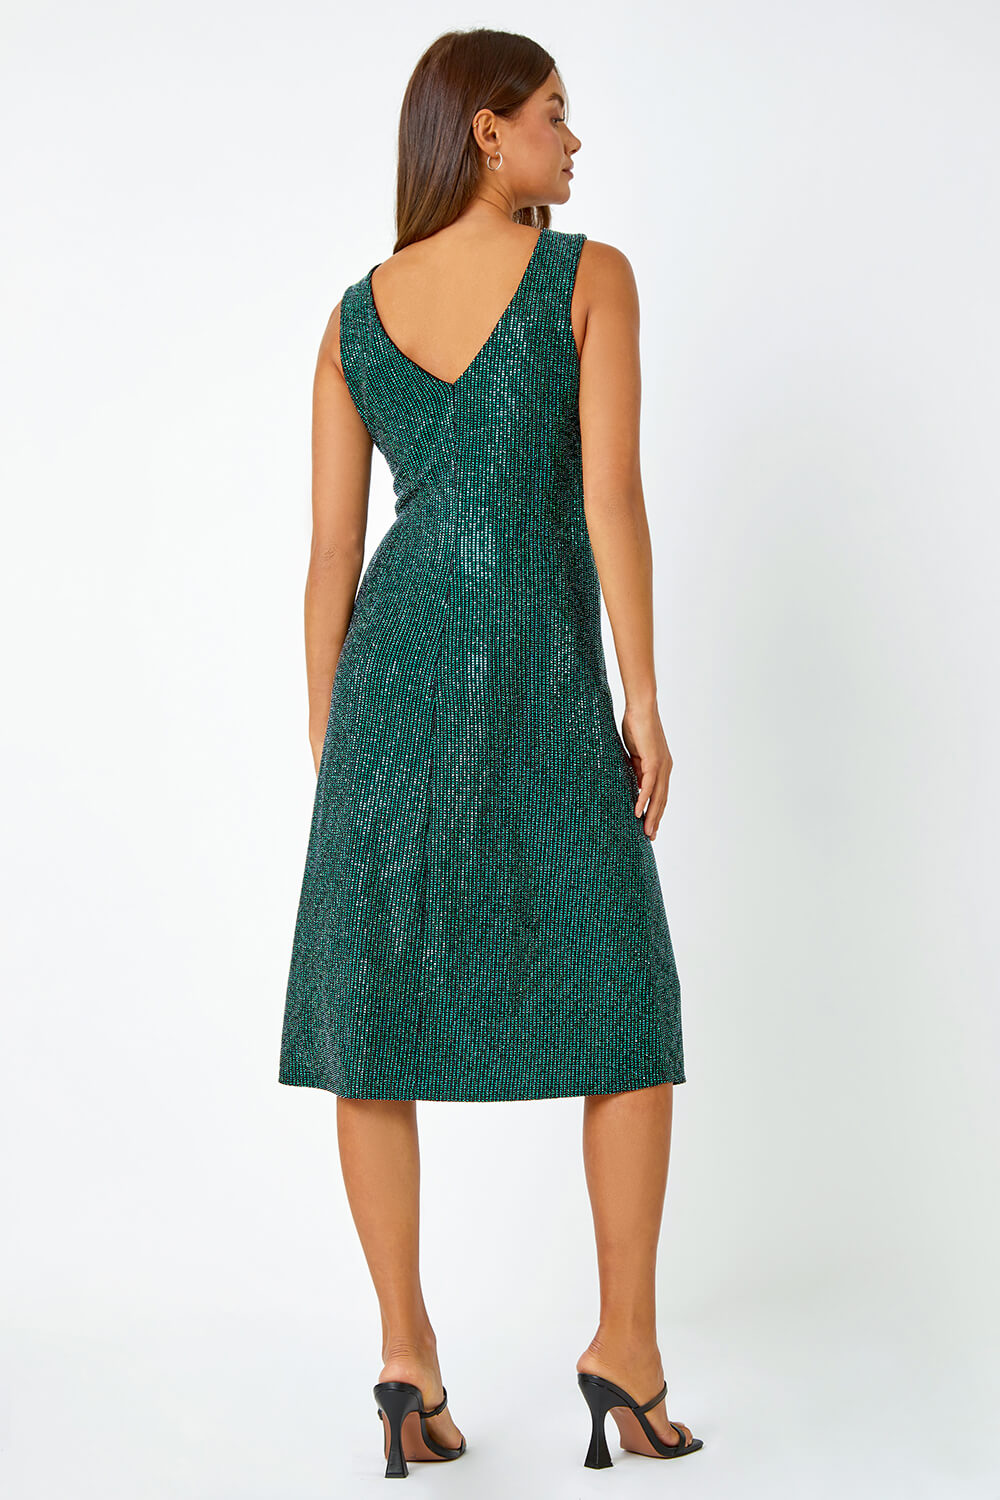 Emerald Sequin Side Twist Stretch Dress, Image 3 of 5